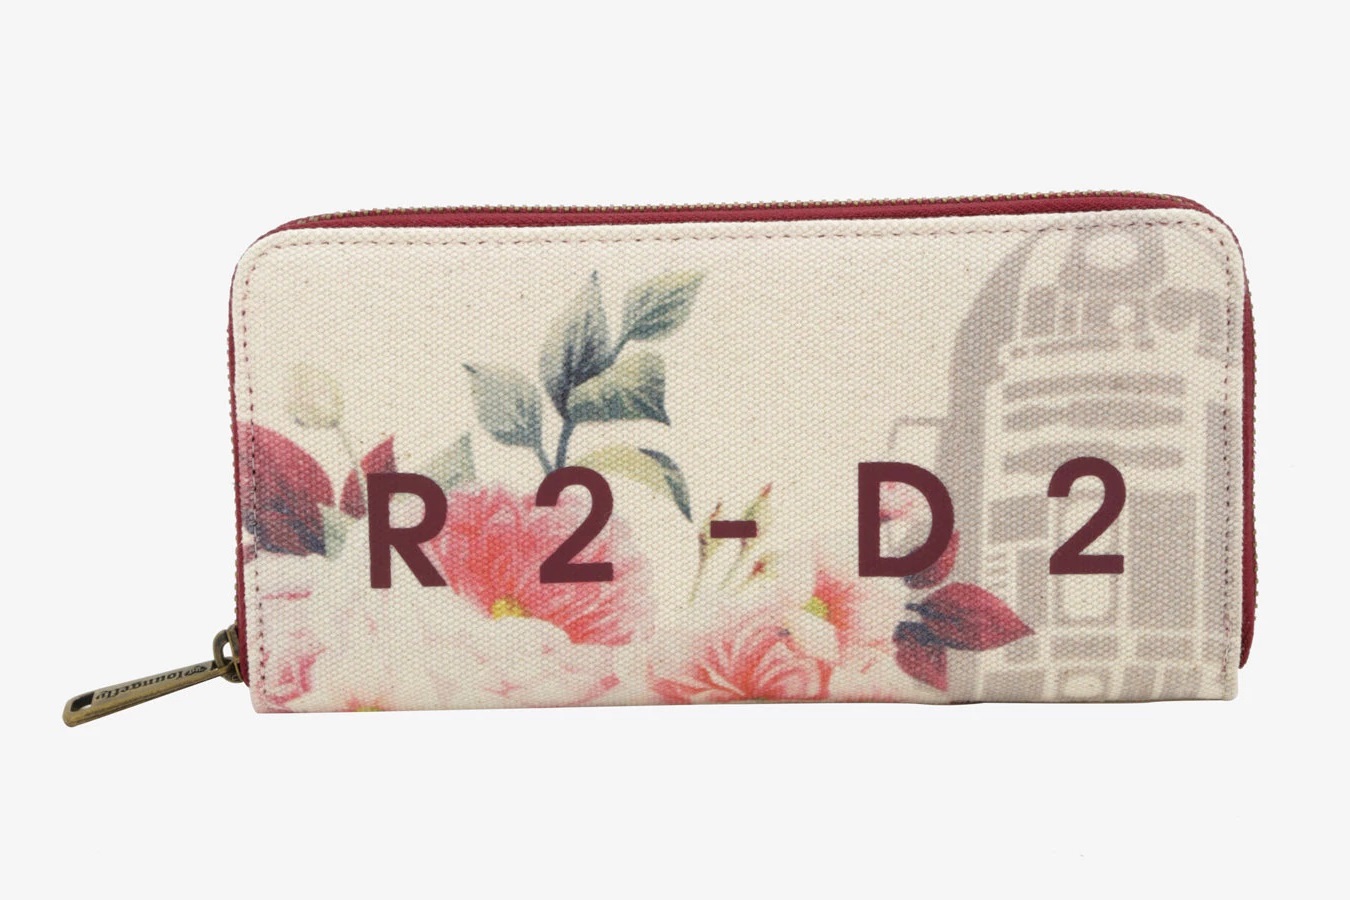 Loungefly x Star Wars R2-D2 Floral Zip-Up Wallet at Box Lunch